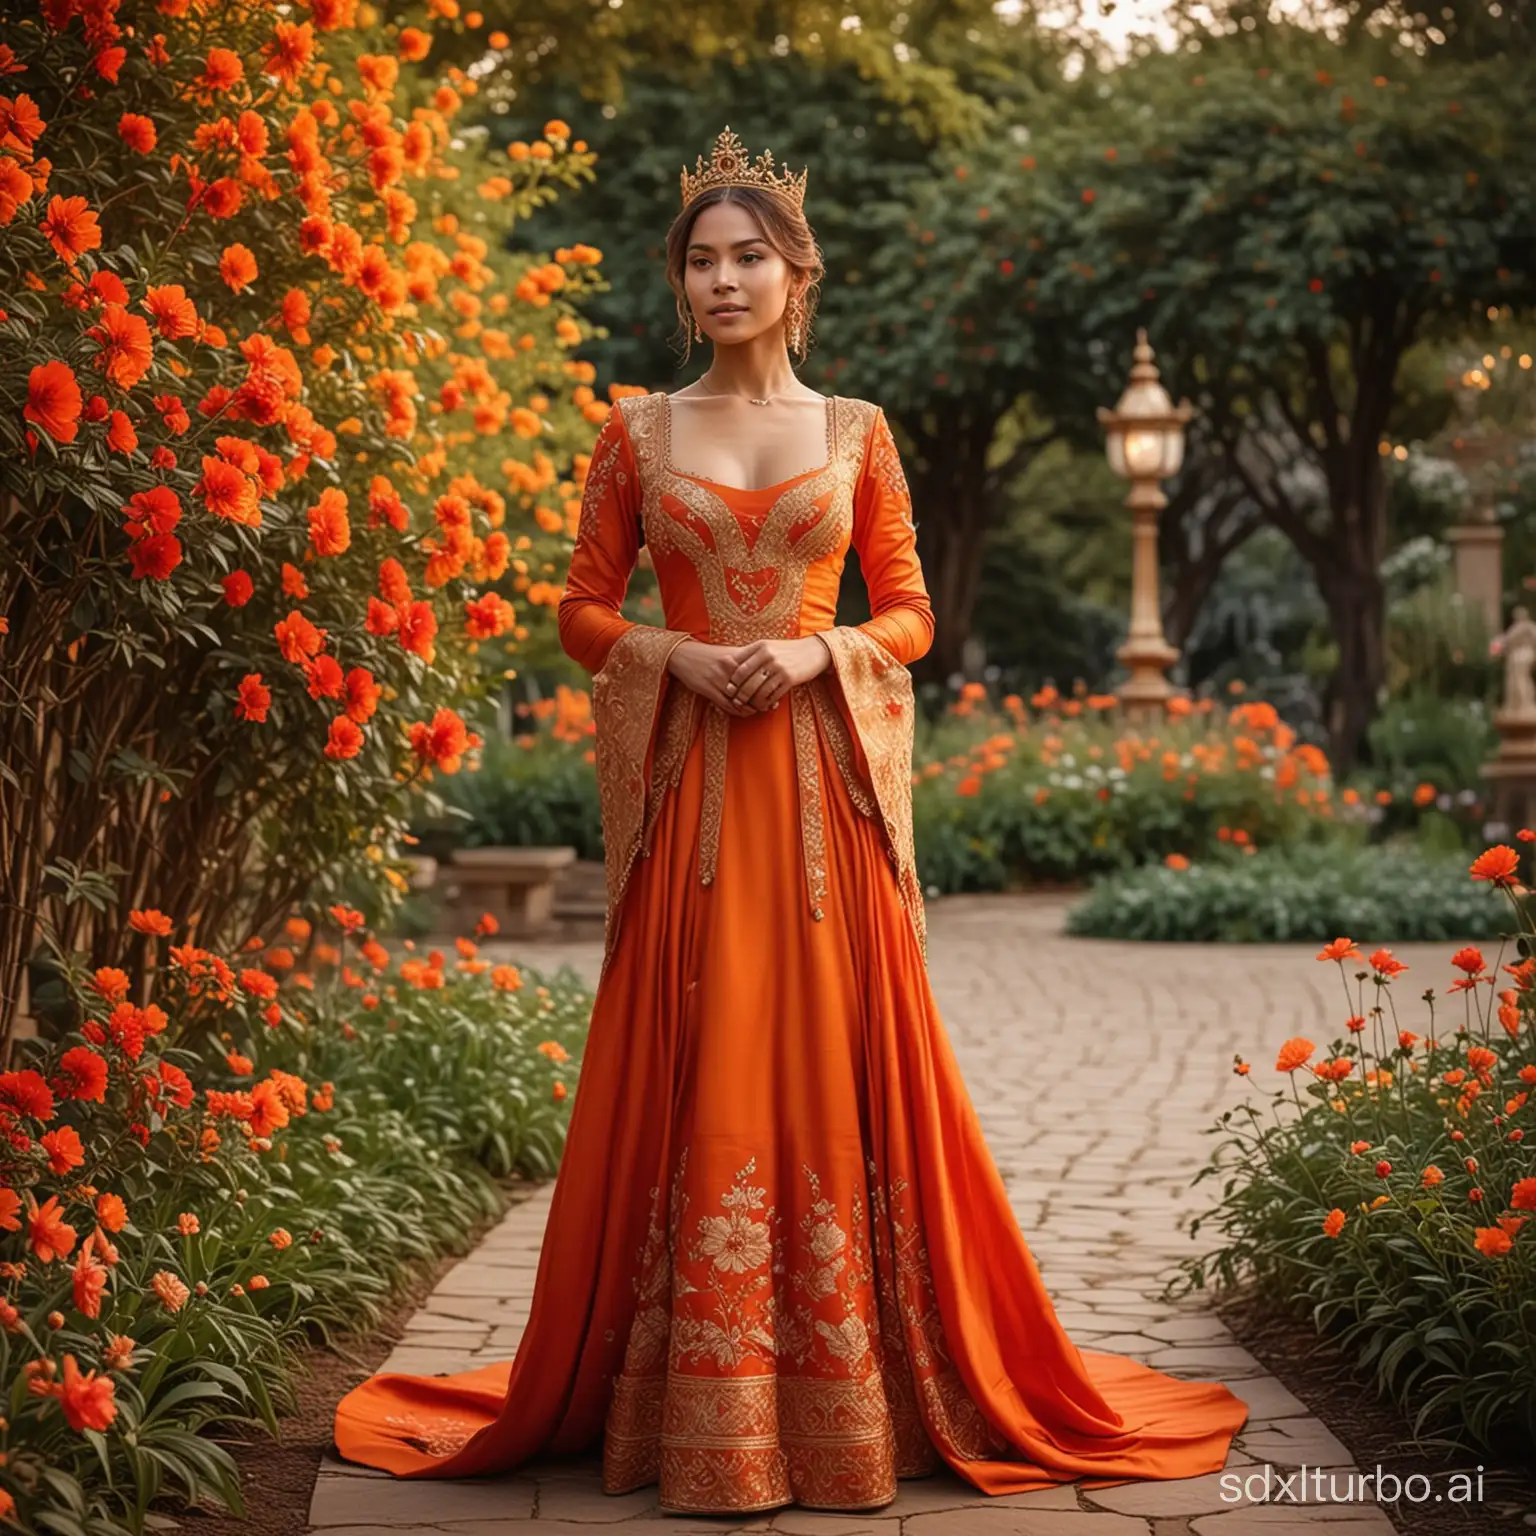 Regal-Fire-Nation-Woman-in-Elegant-Royal-Attire-Standing-Gracefully-in-a-Beautiful-Garden